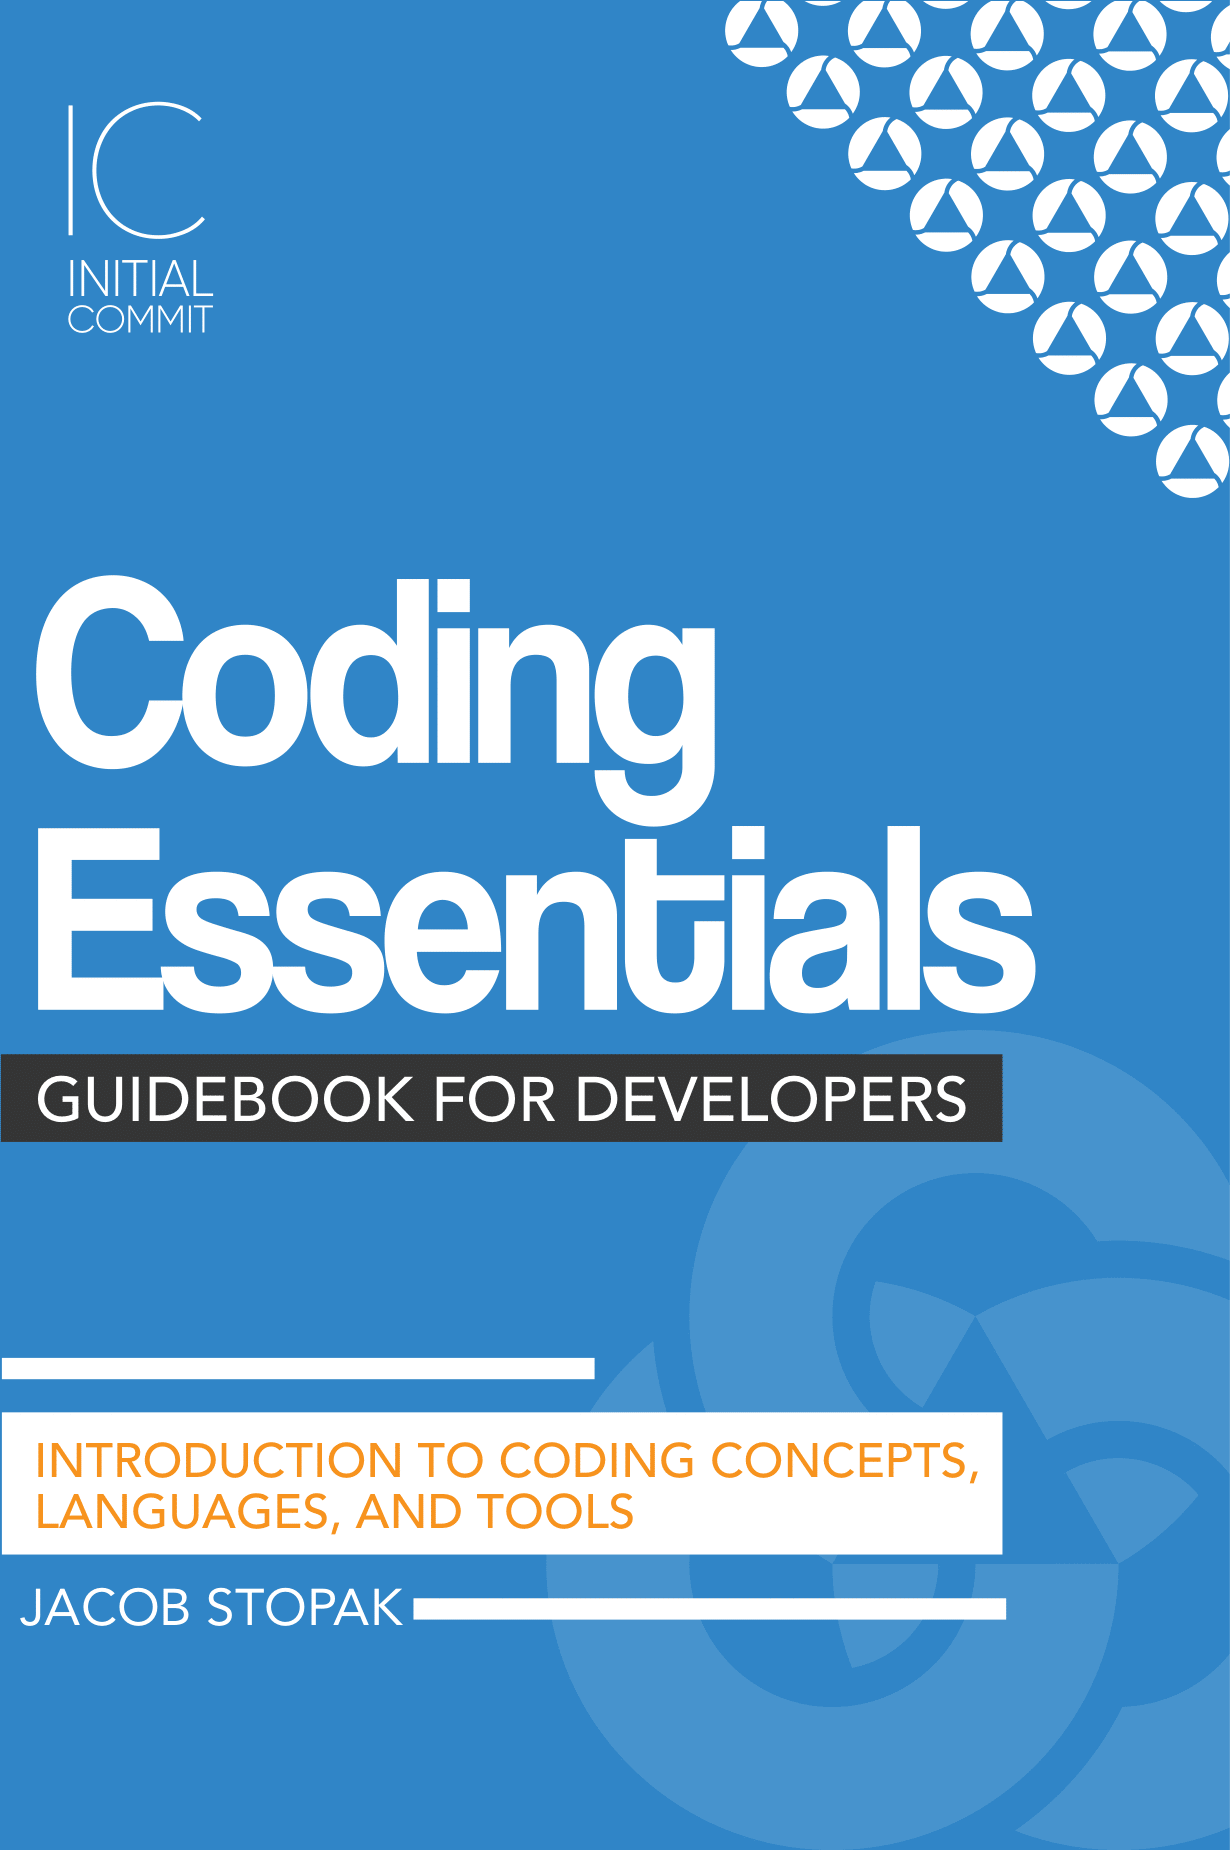 Image of the cover of the Coding Essentials Guidebook for Developers